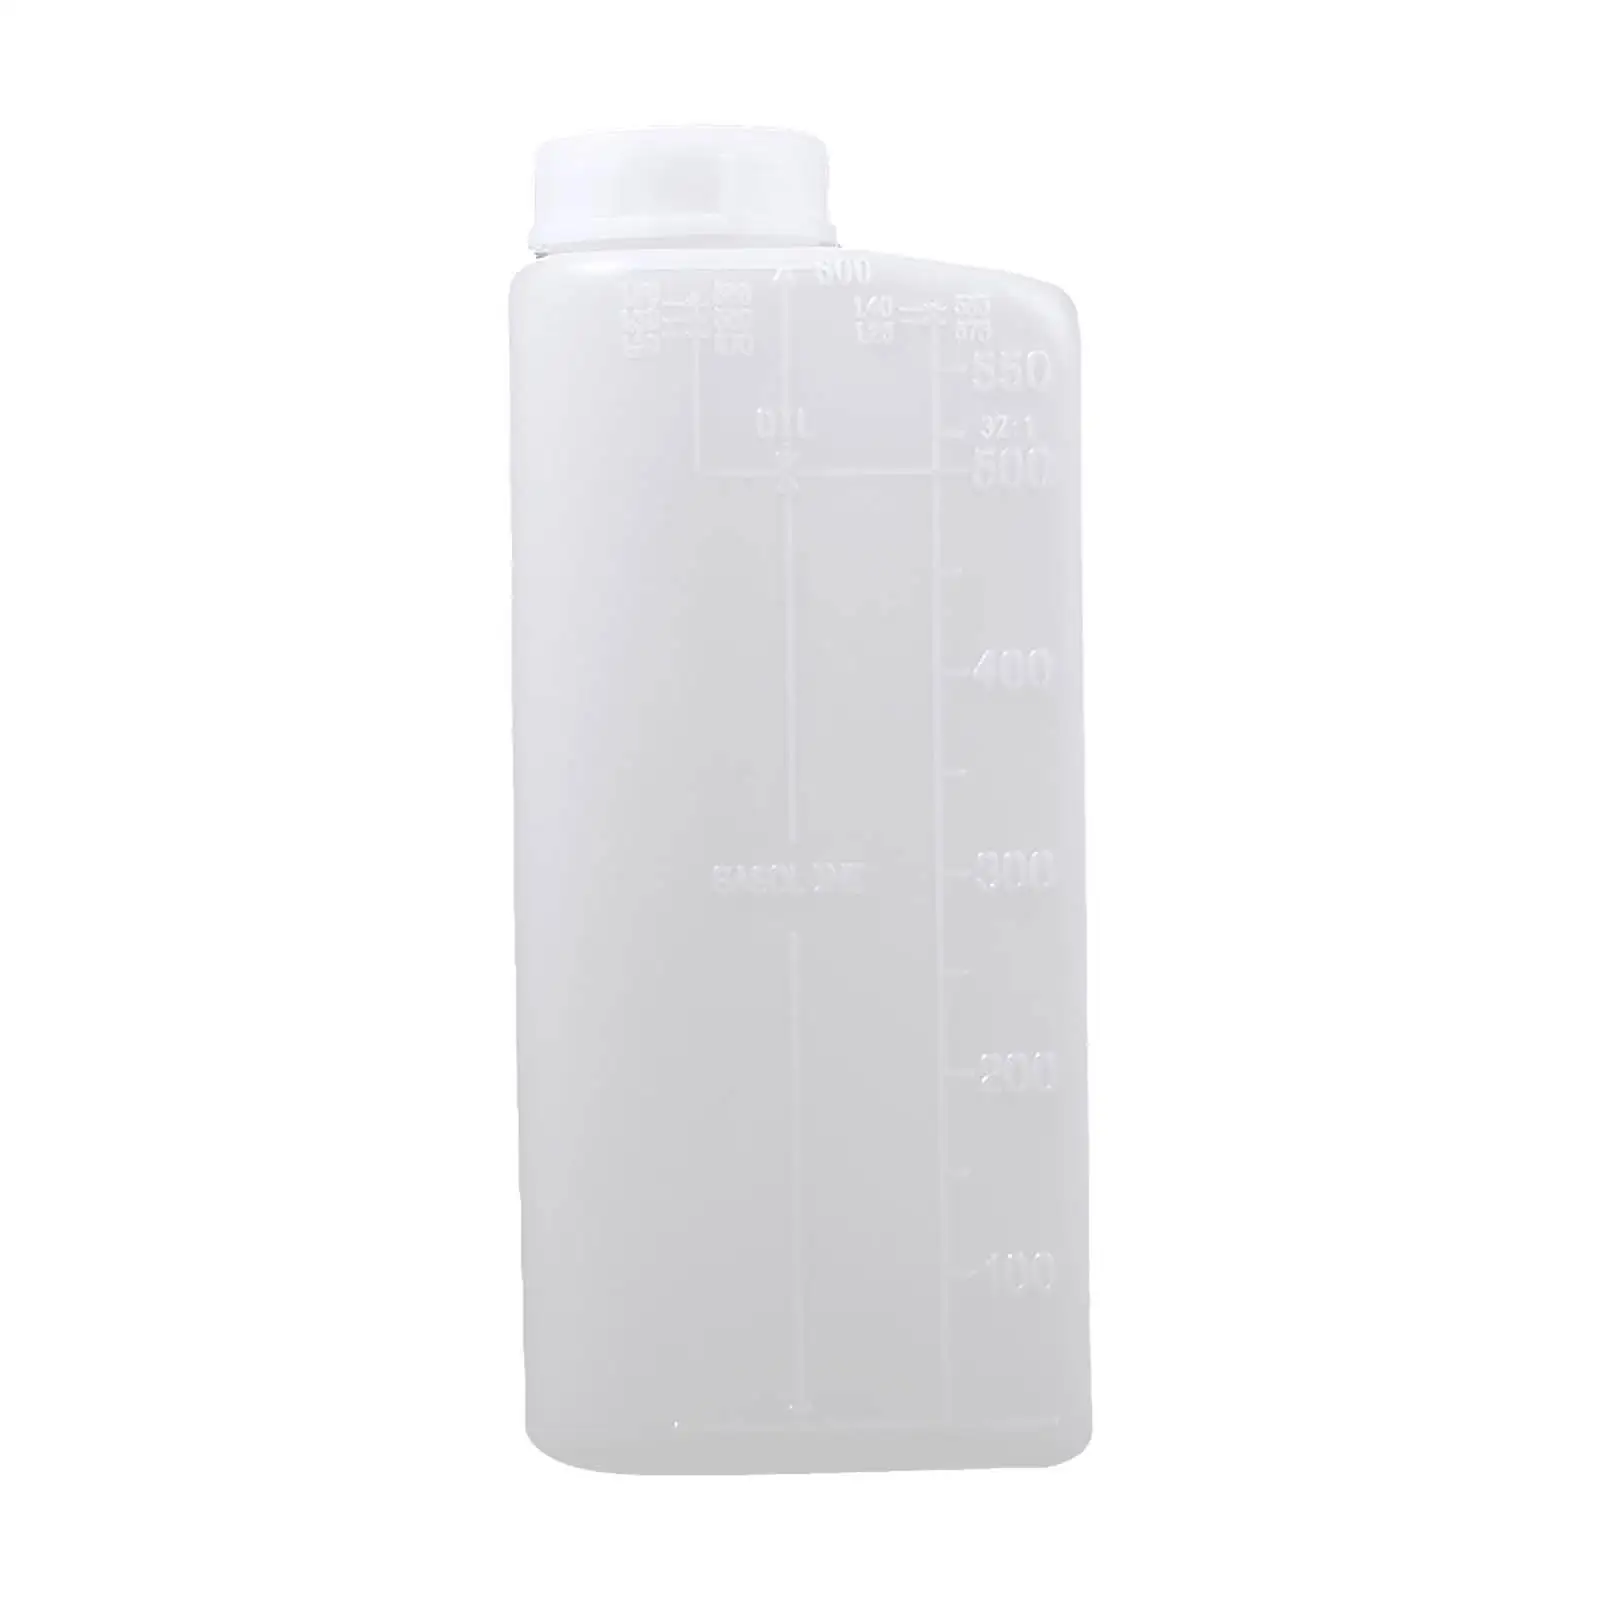 600ml Fuel Mixing Bottle Portable Small 2-Stroke Petrol Bottle for Lawn Trimmer Kitchen Gadget Accessory Tool